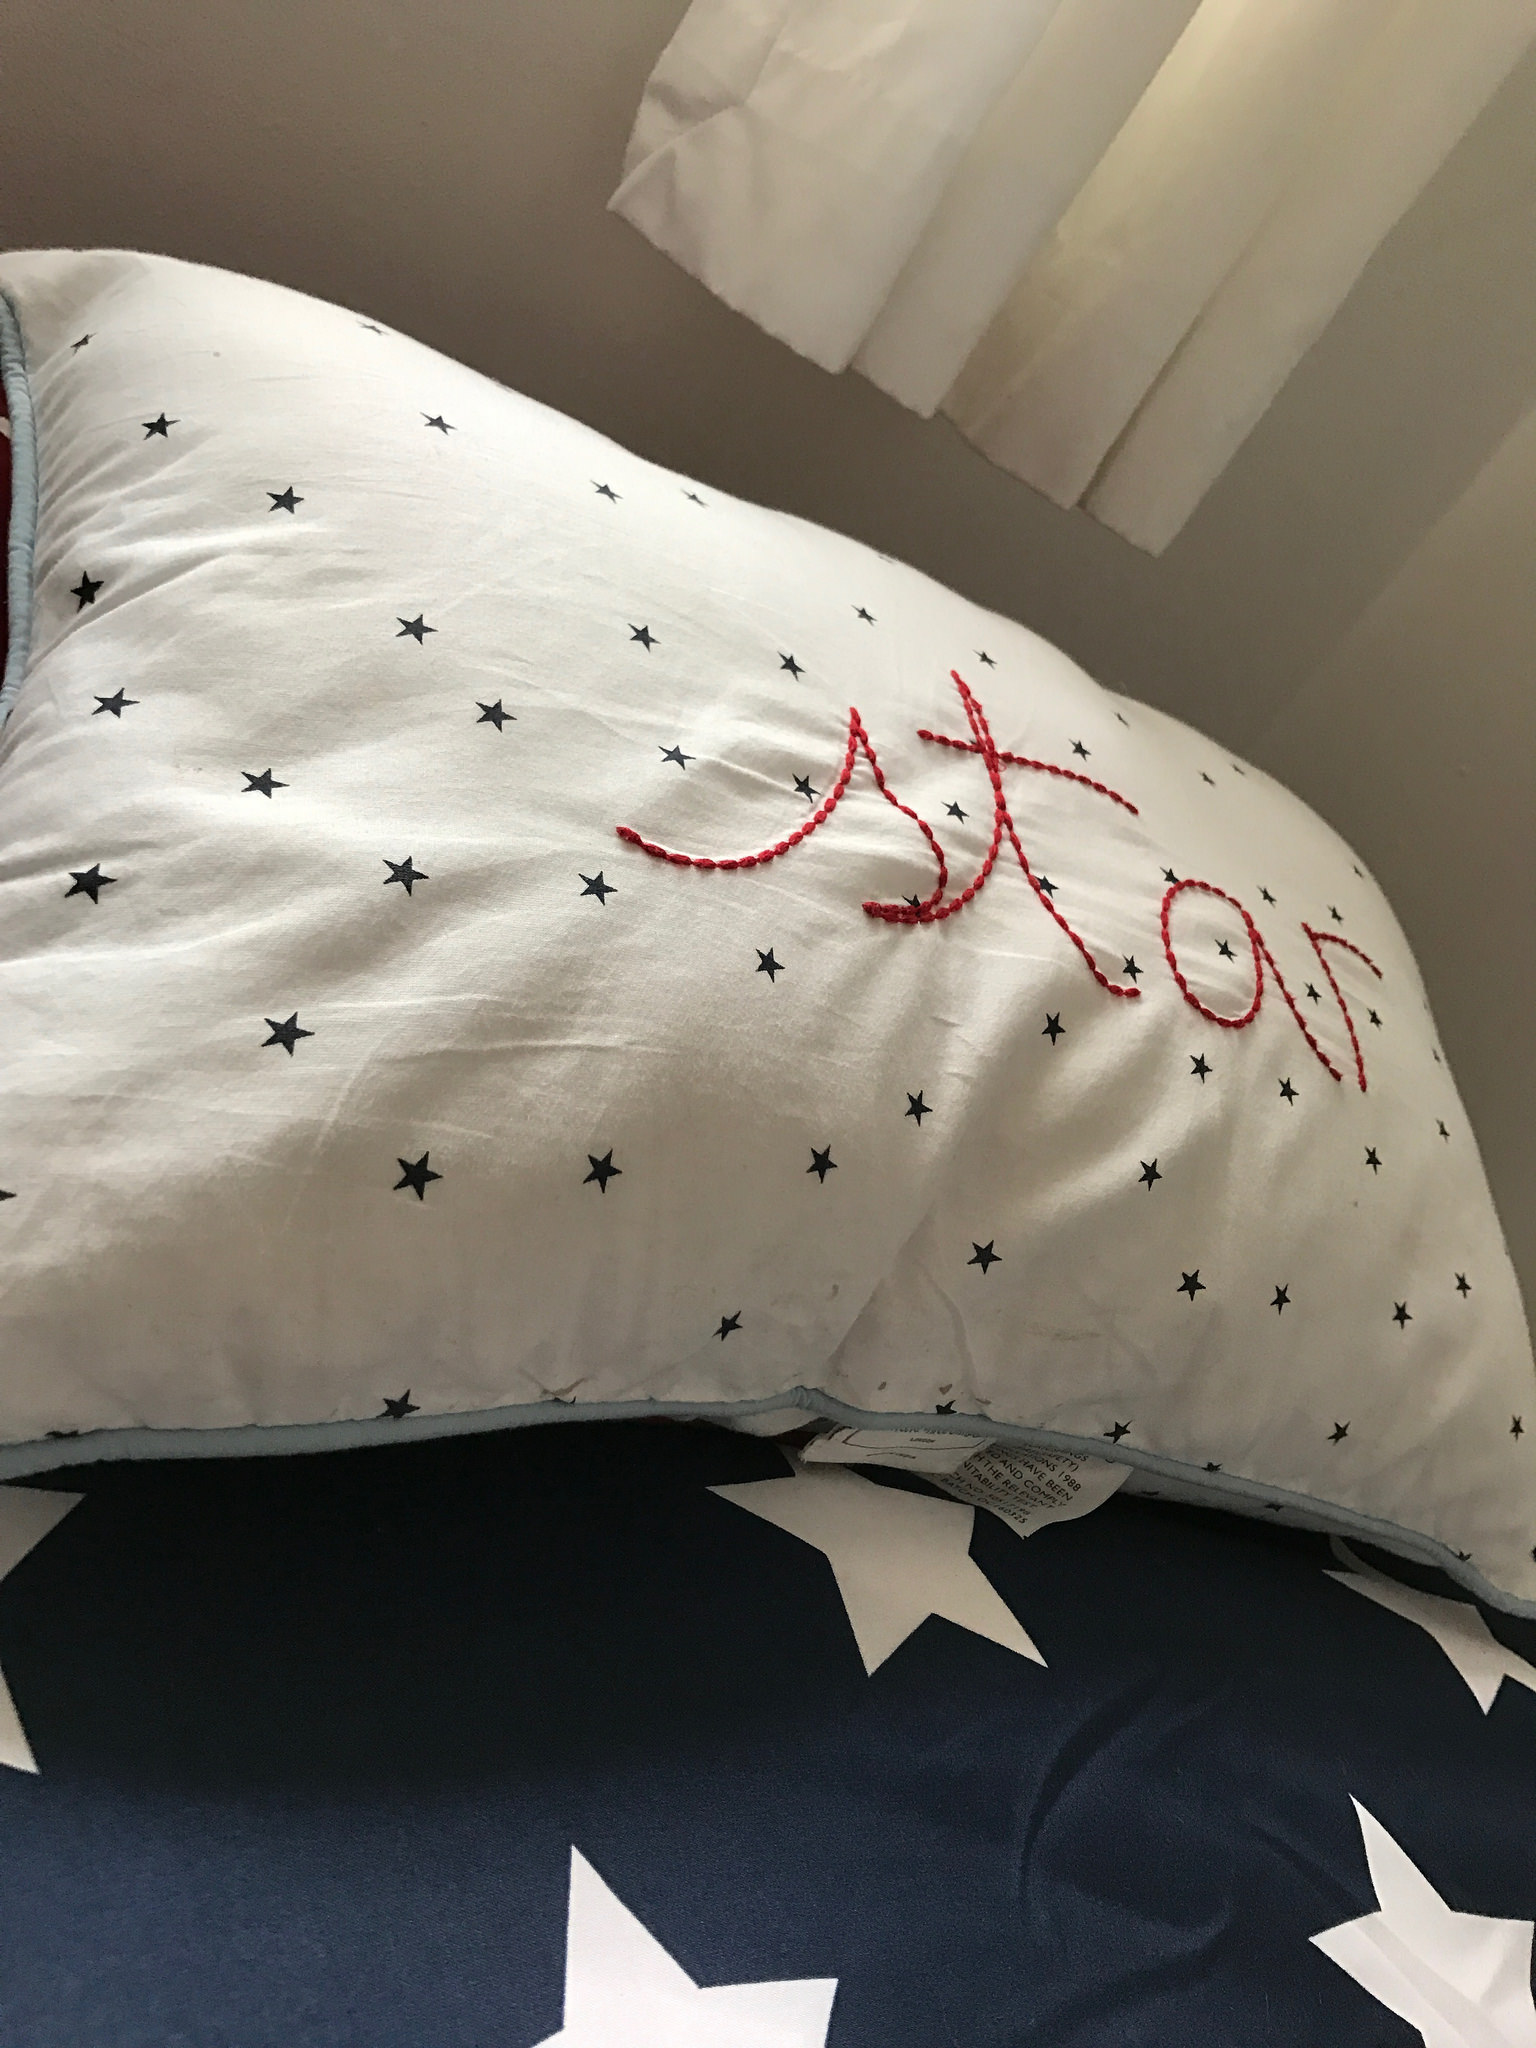 Space themed boy's bedroom